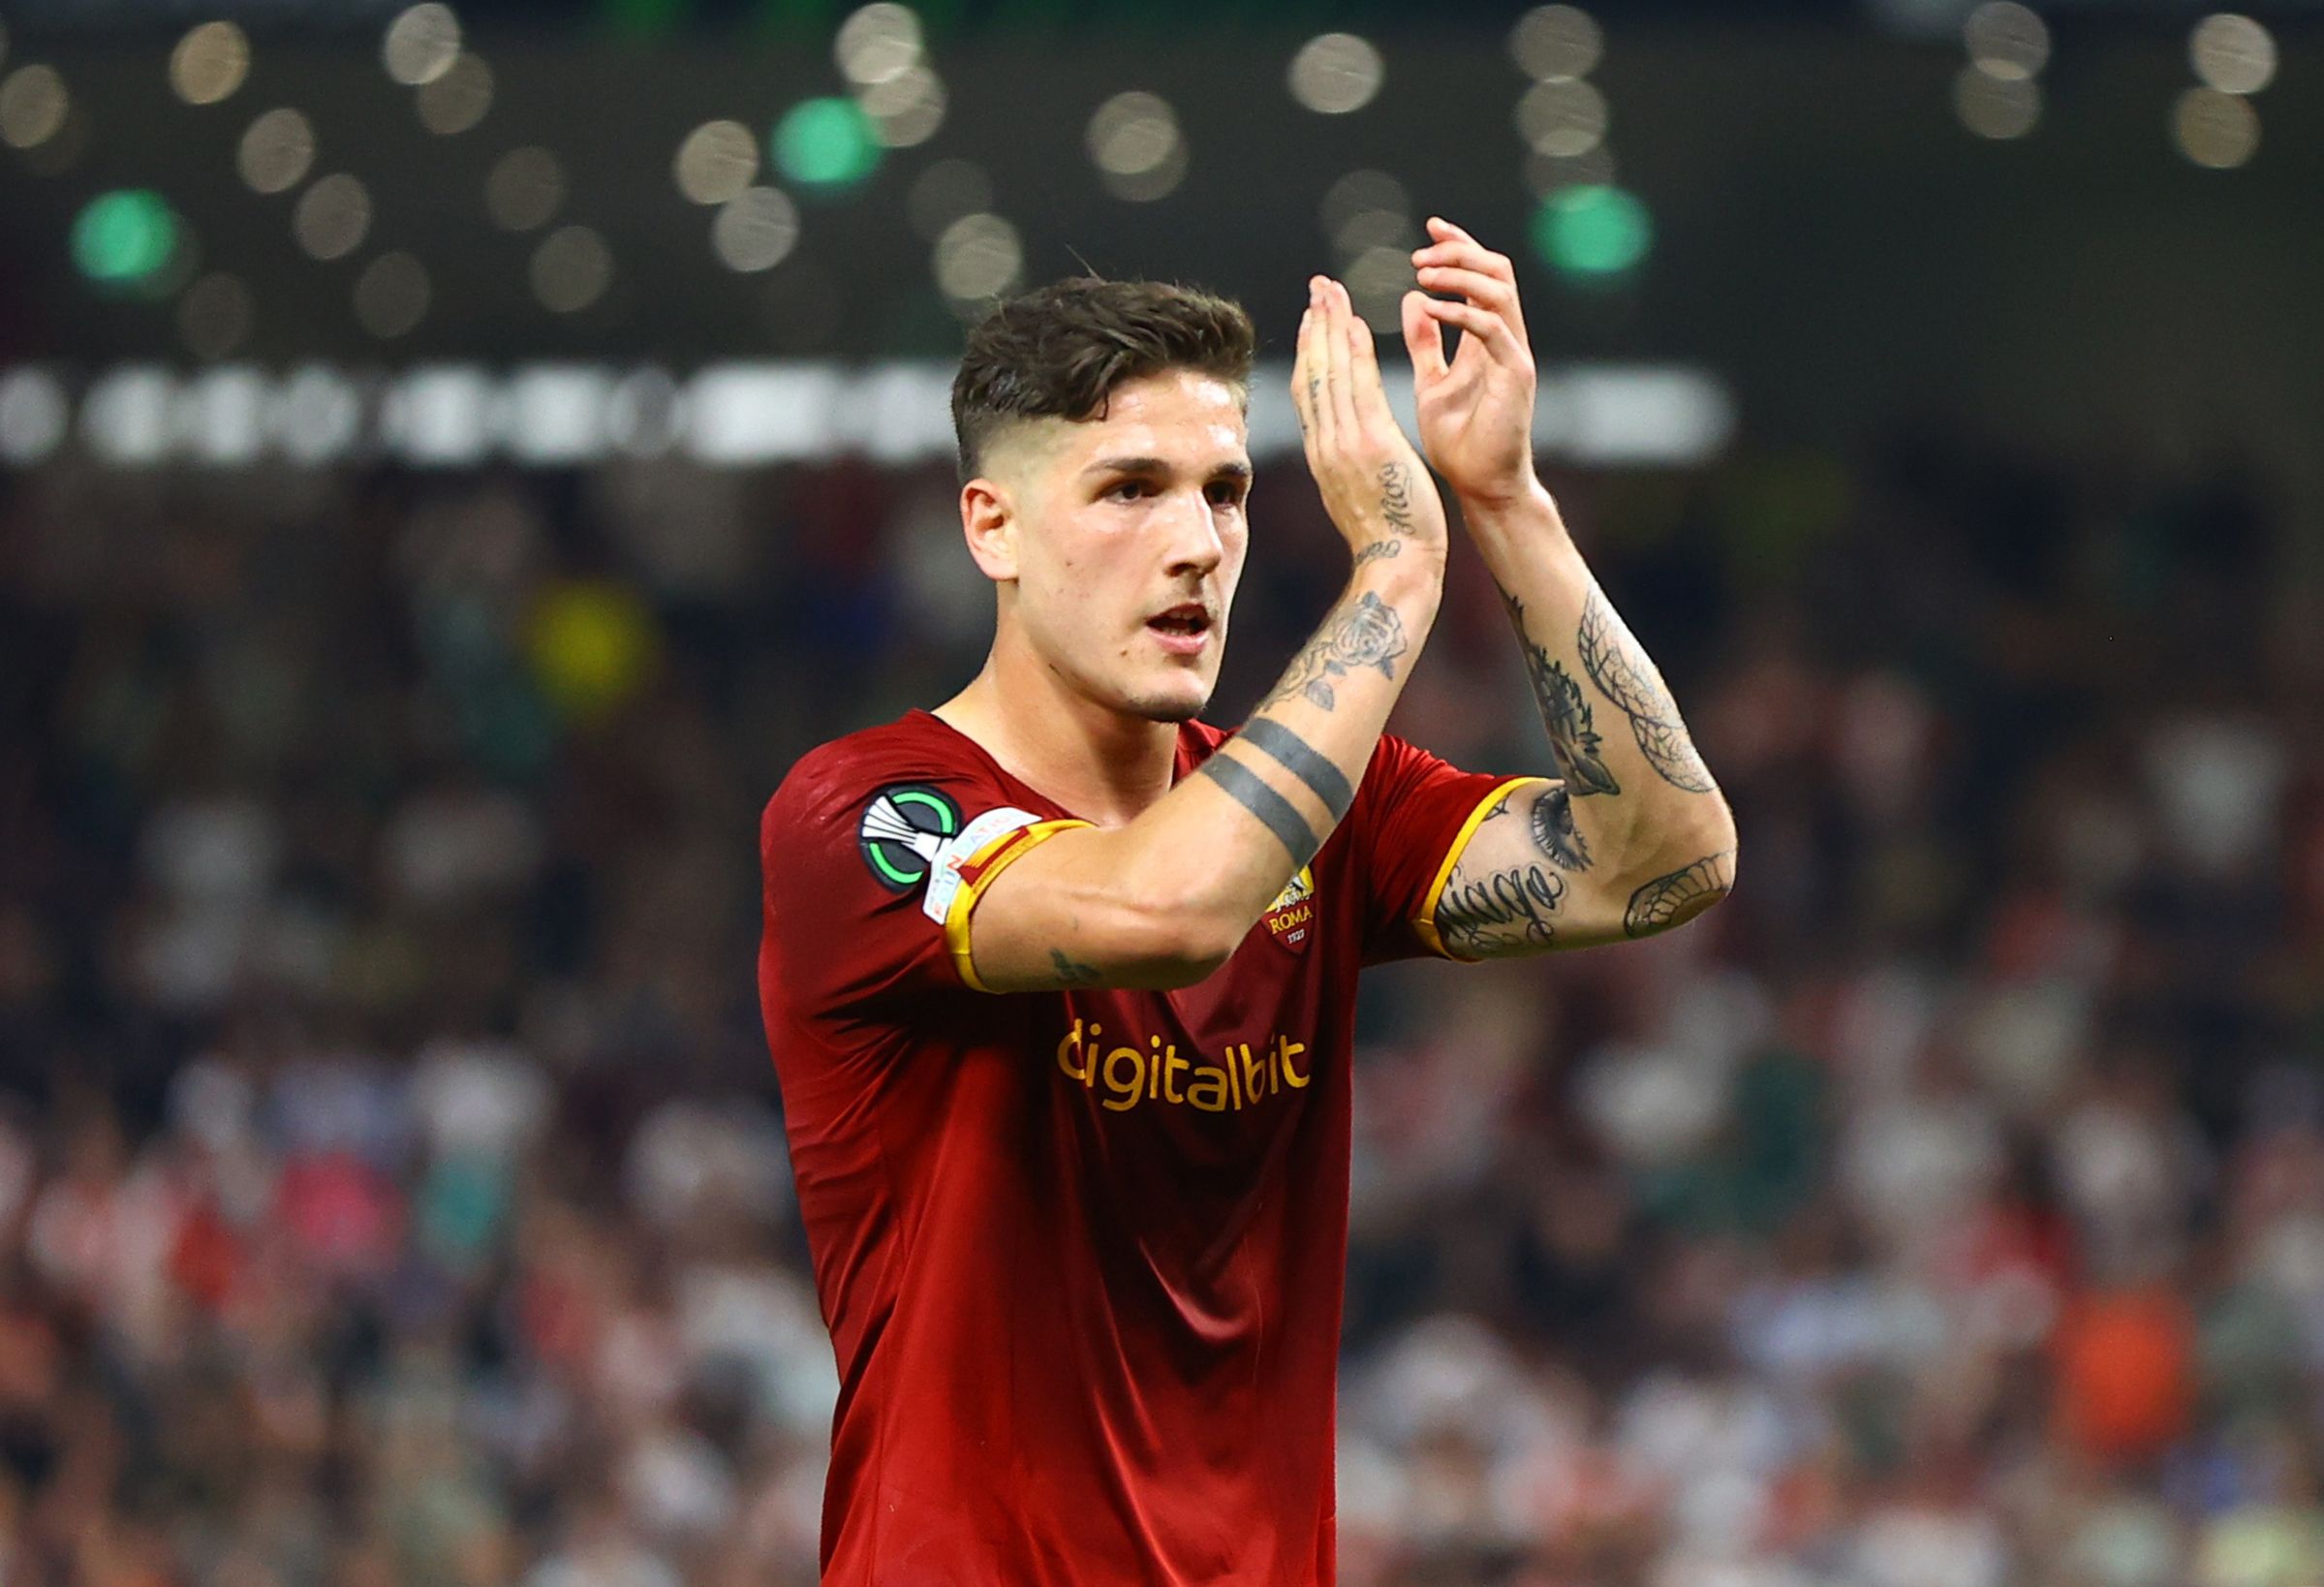 Tottenham: Lilywhites ‘looking to complete a deal’ for Zaniolo despite injury -Tottenham Hotspur Transfer Rumours